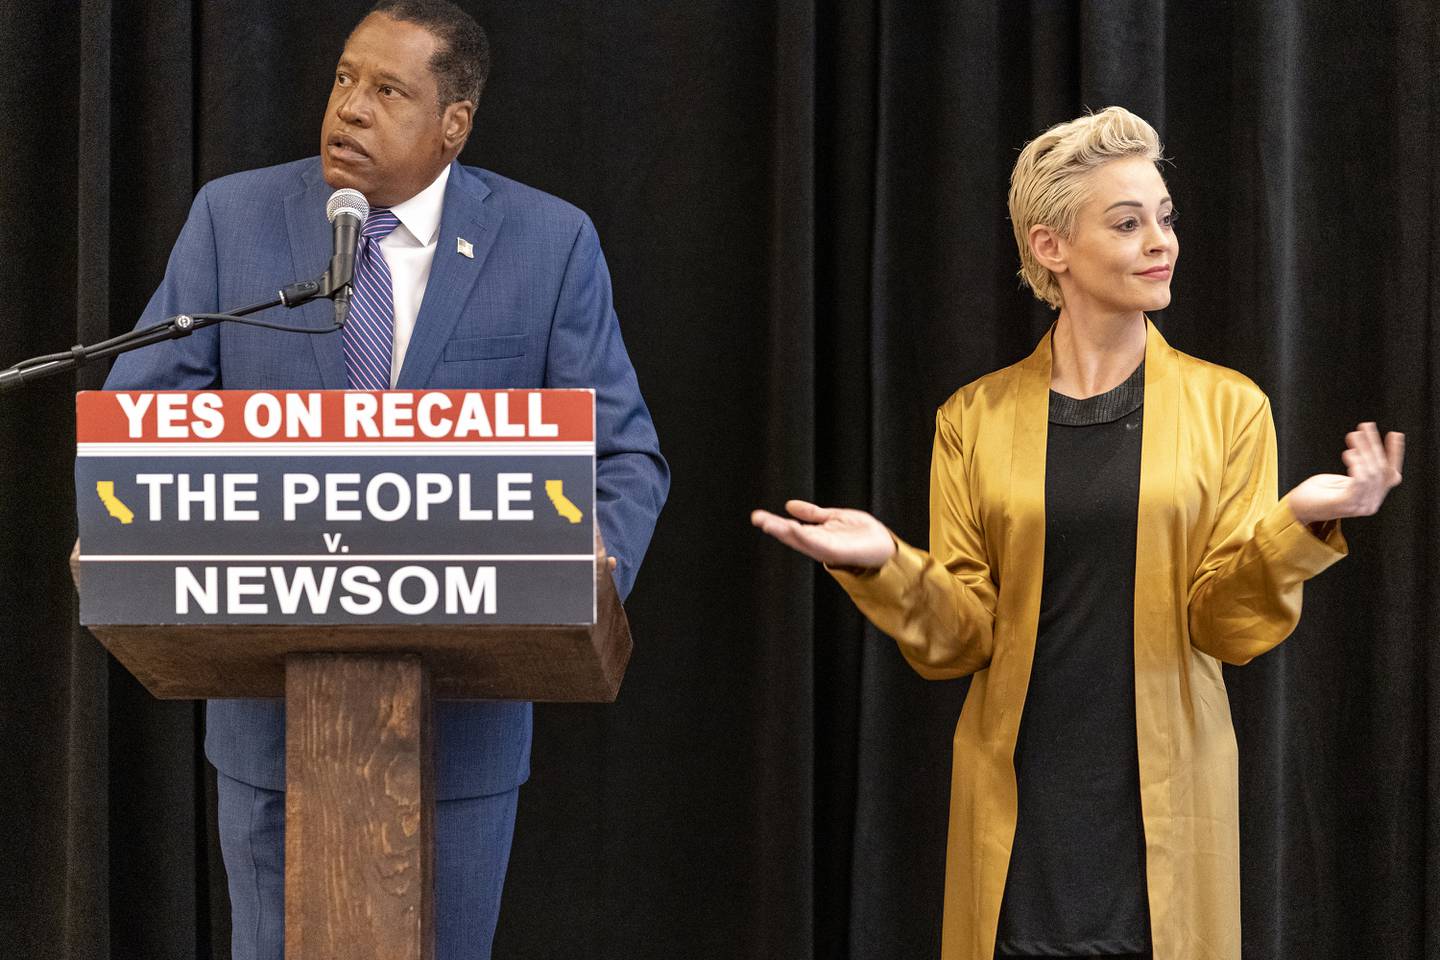 Former actor and activist Rose McGowan listens to Larry Elder, who is running to replace Democratic Governor Gavin Newsom, at a press conference in Los Angeles. AP